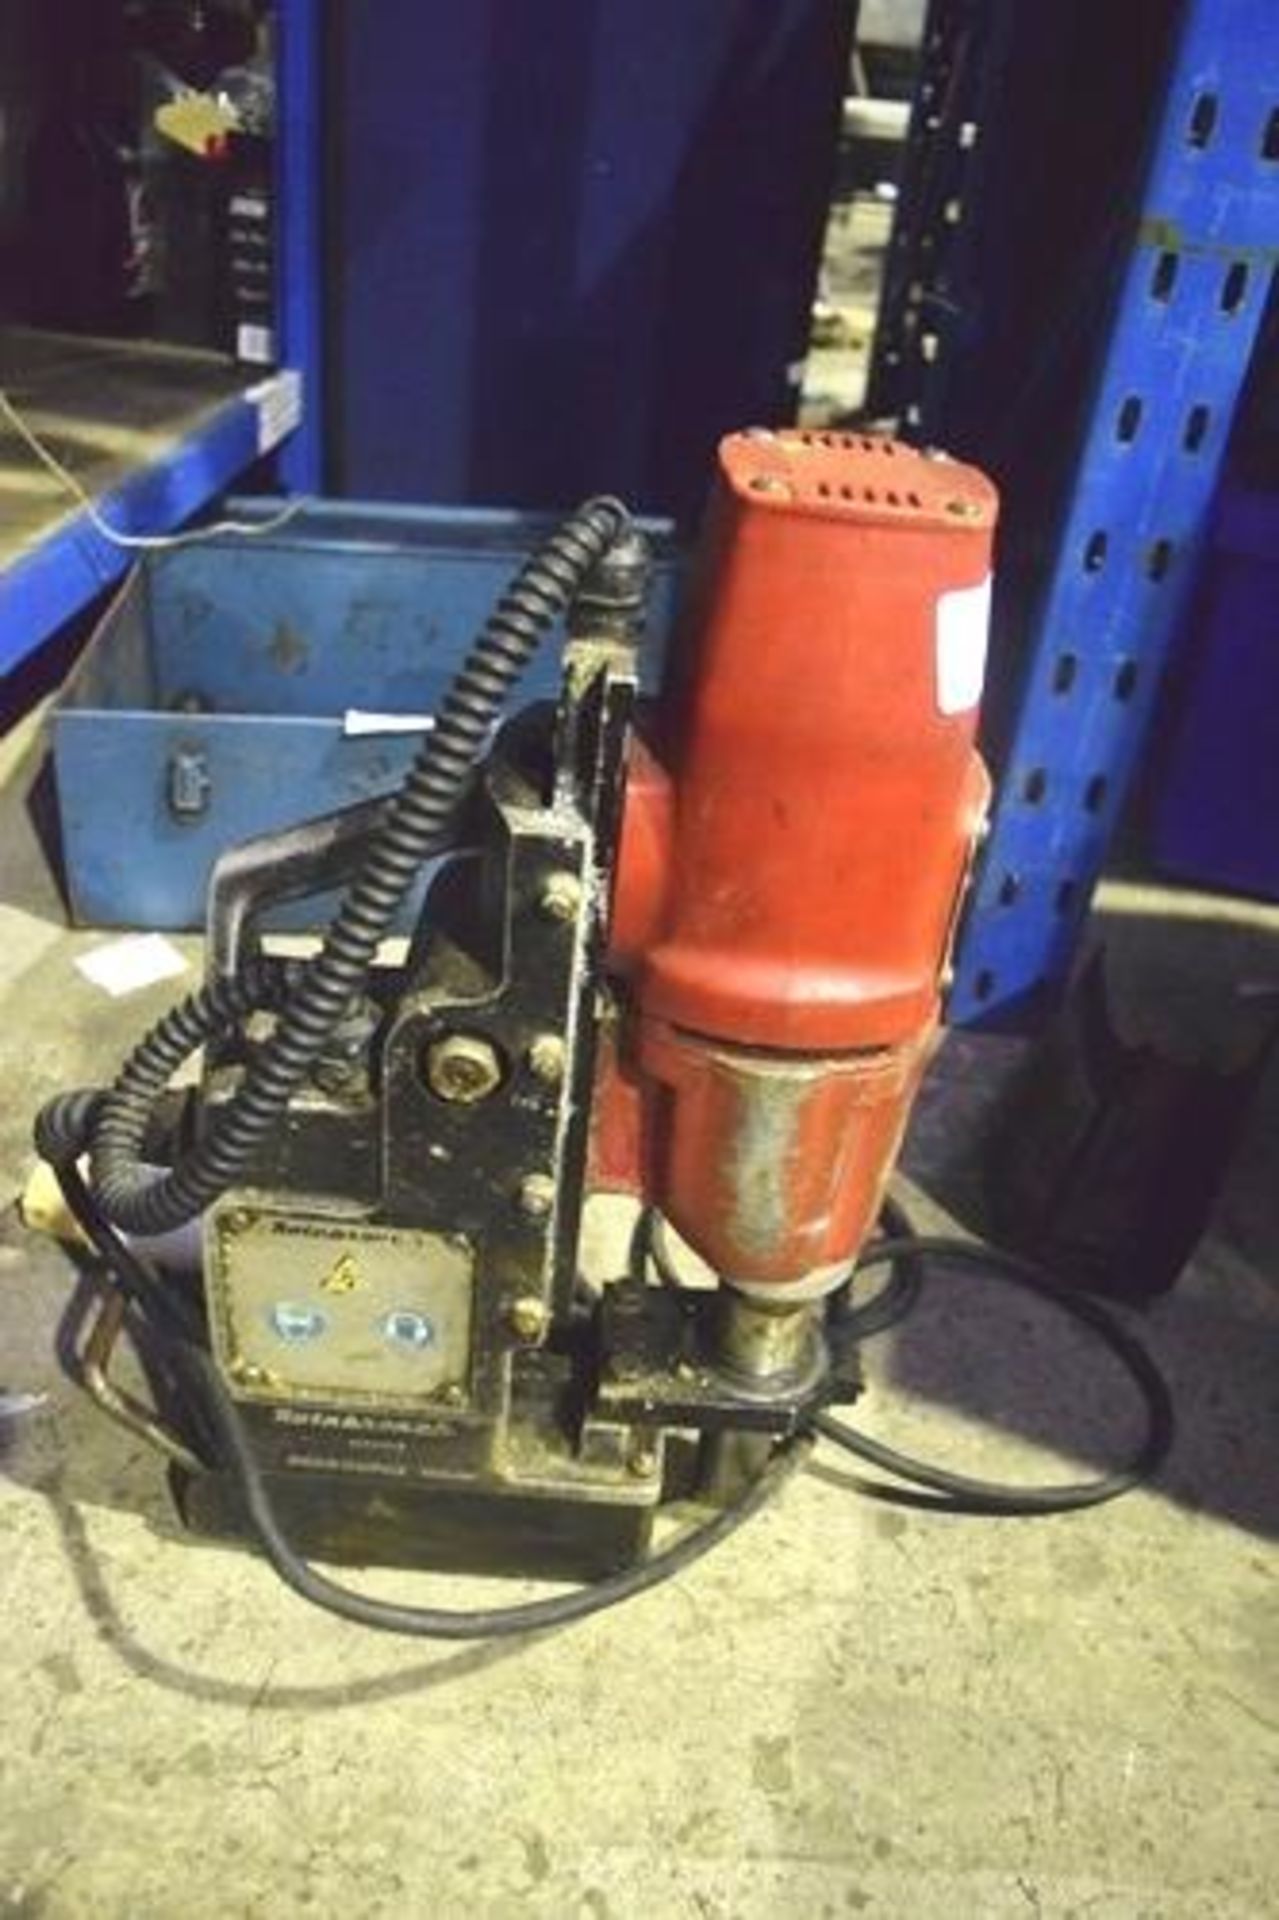 Rotabroach 110V magnetic drill stand, S.N. 15824 - Second-hand (GS16) - Image 3 of 3